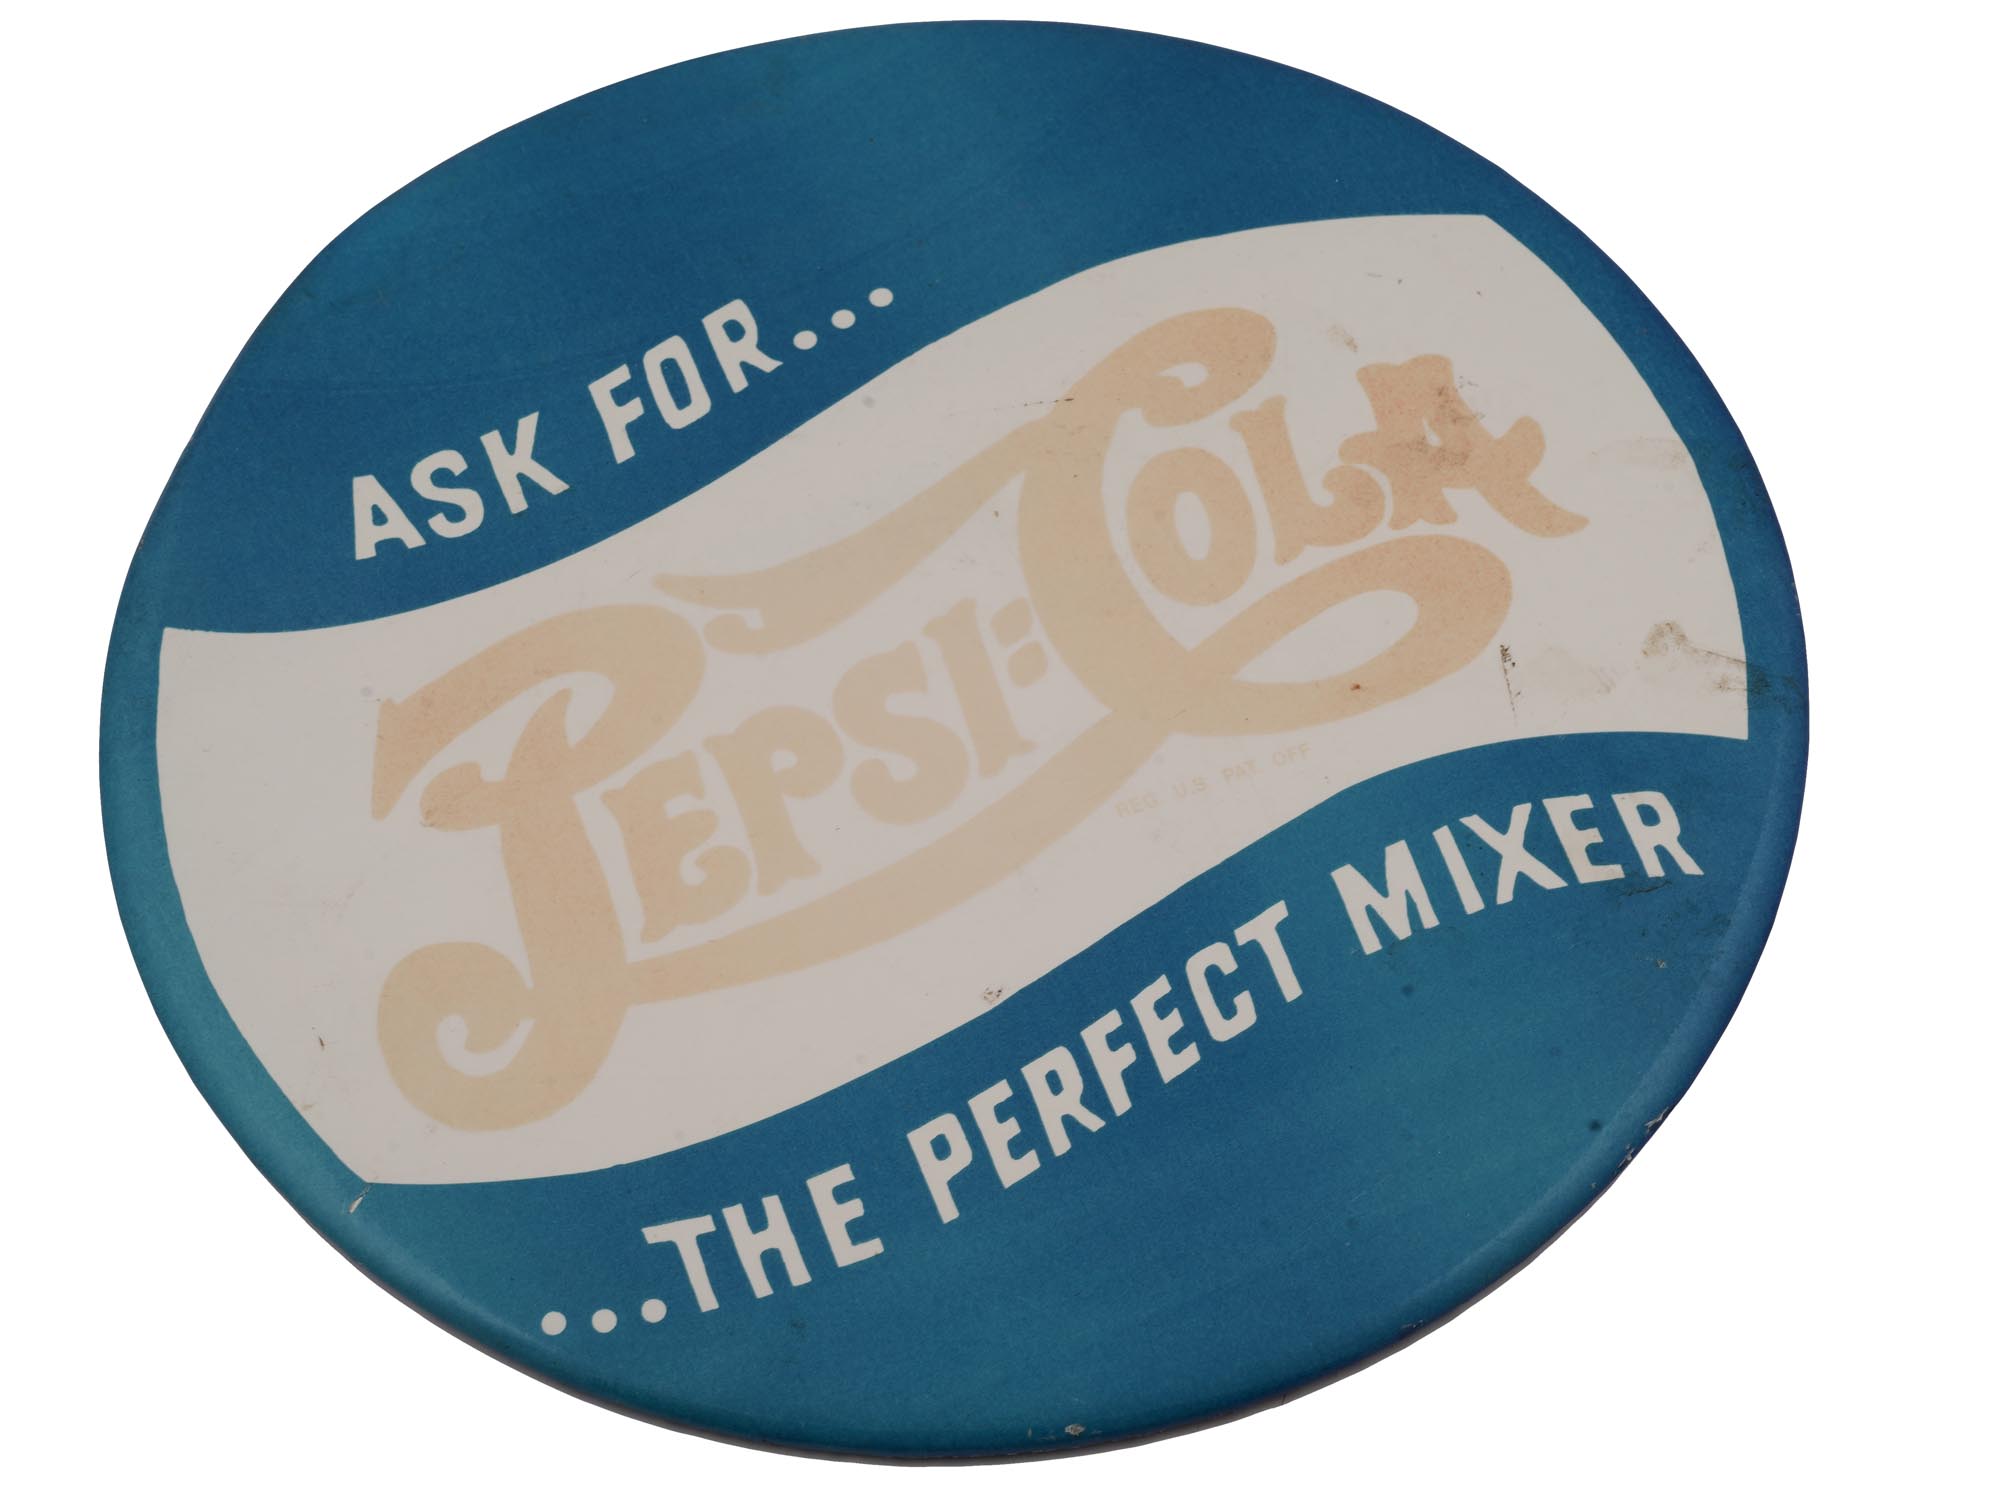 VINTAGE ASK FOR PEPSI COLA METAL ADVERTISING SIGN PIC-1